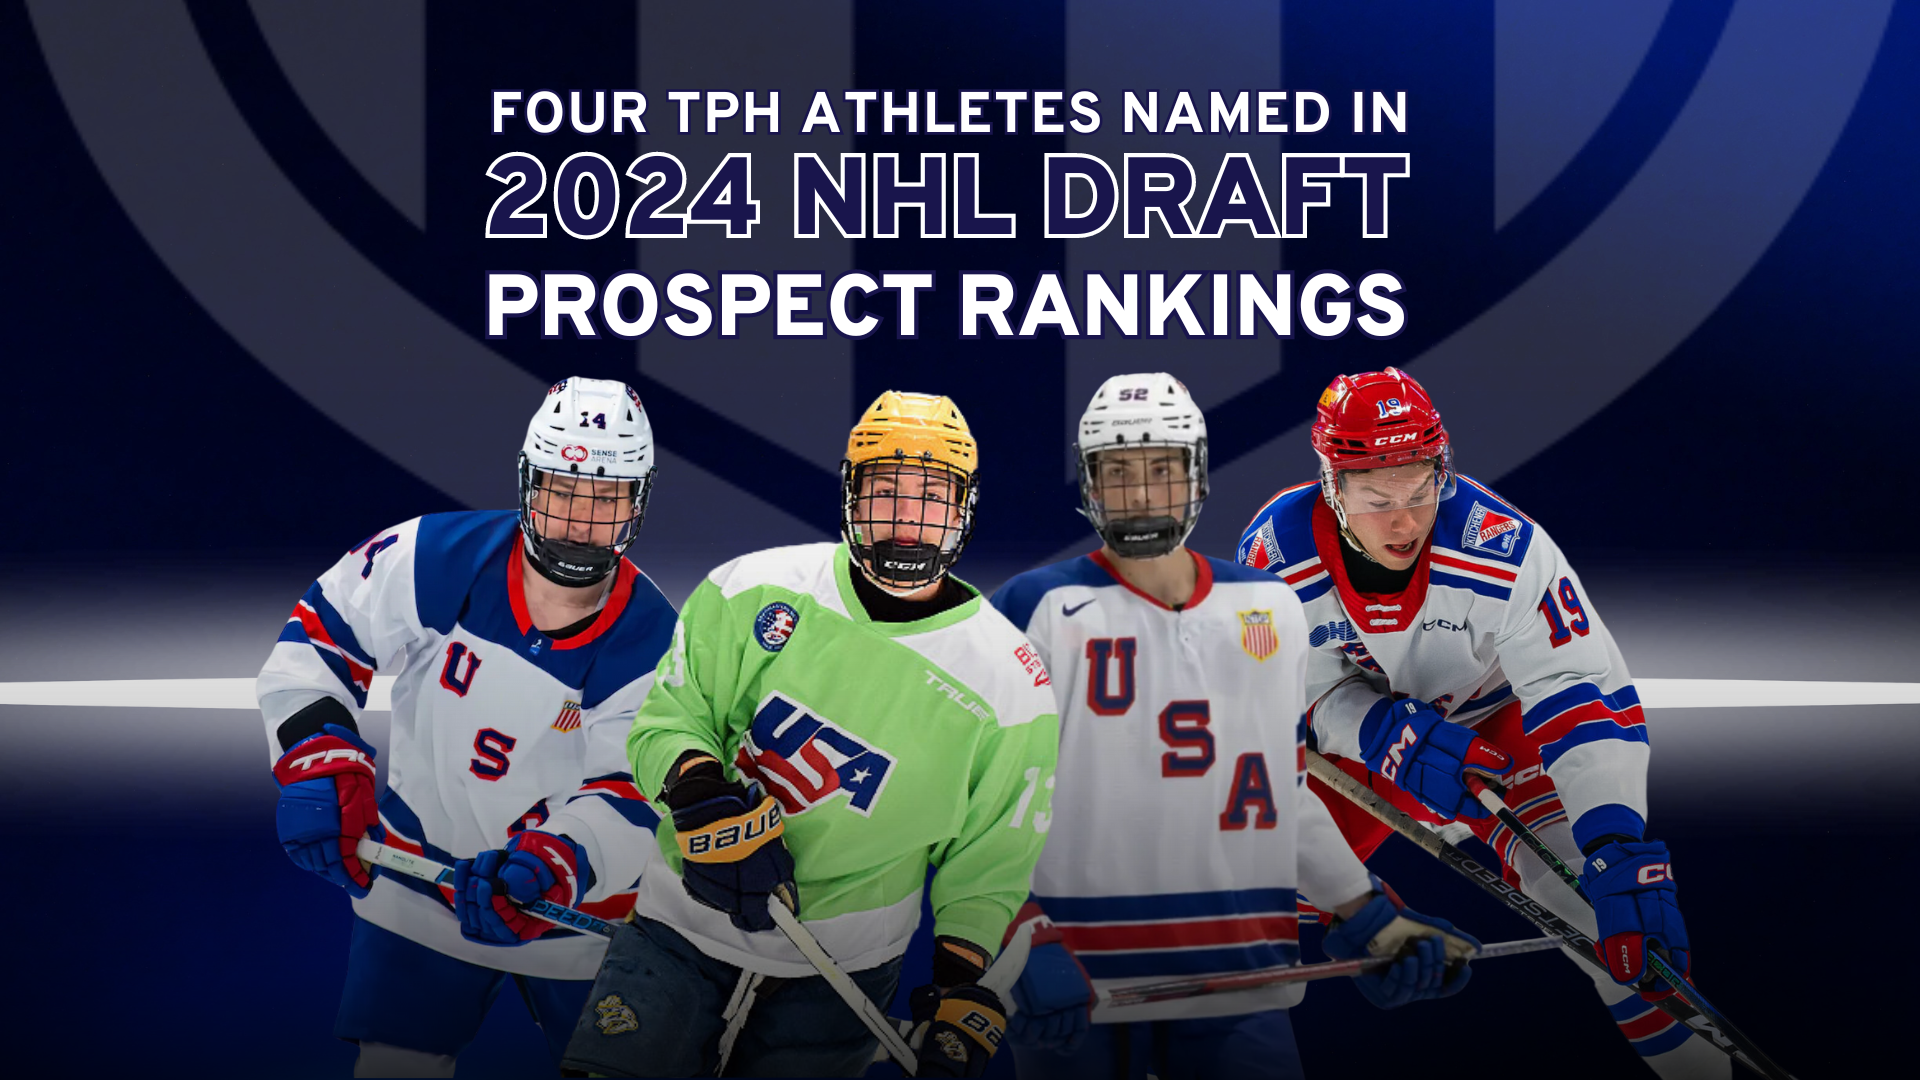 TPH Academy StudentAthletes and Alumni Earn Spots in the 2024 NHL